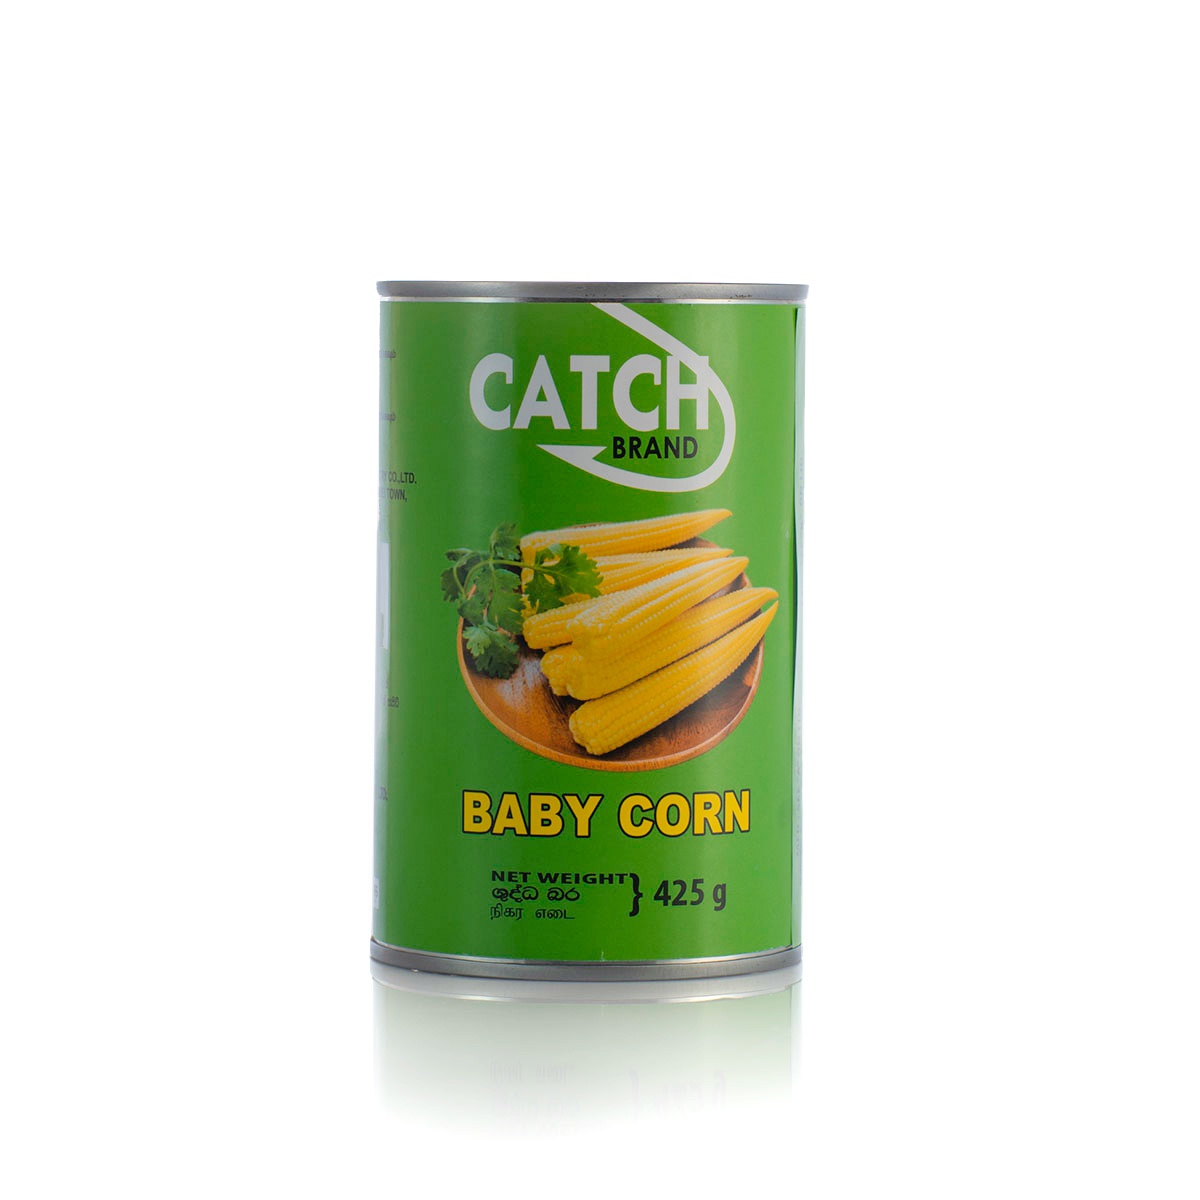 Catch Baby Corn 425g - CATCH - Processed/ Preserved Vegetables - in Sri Lanka